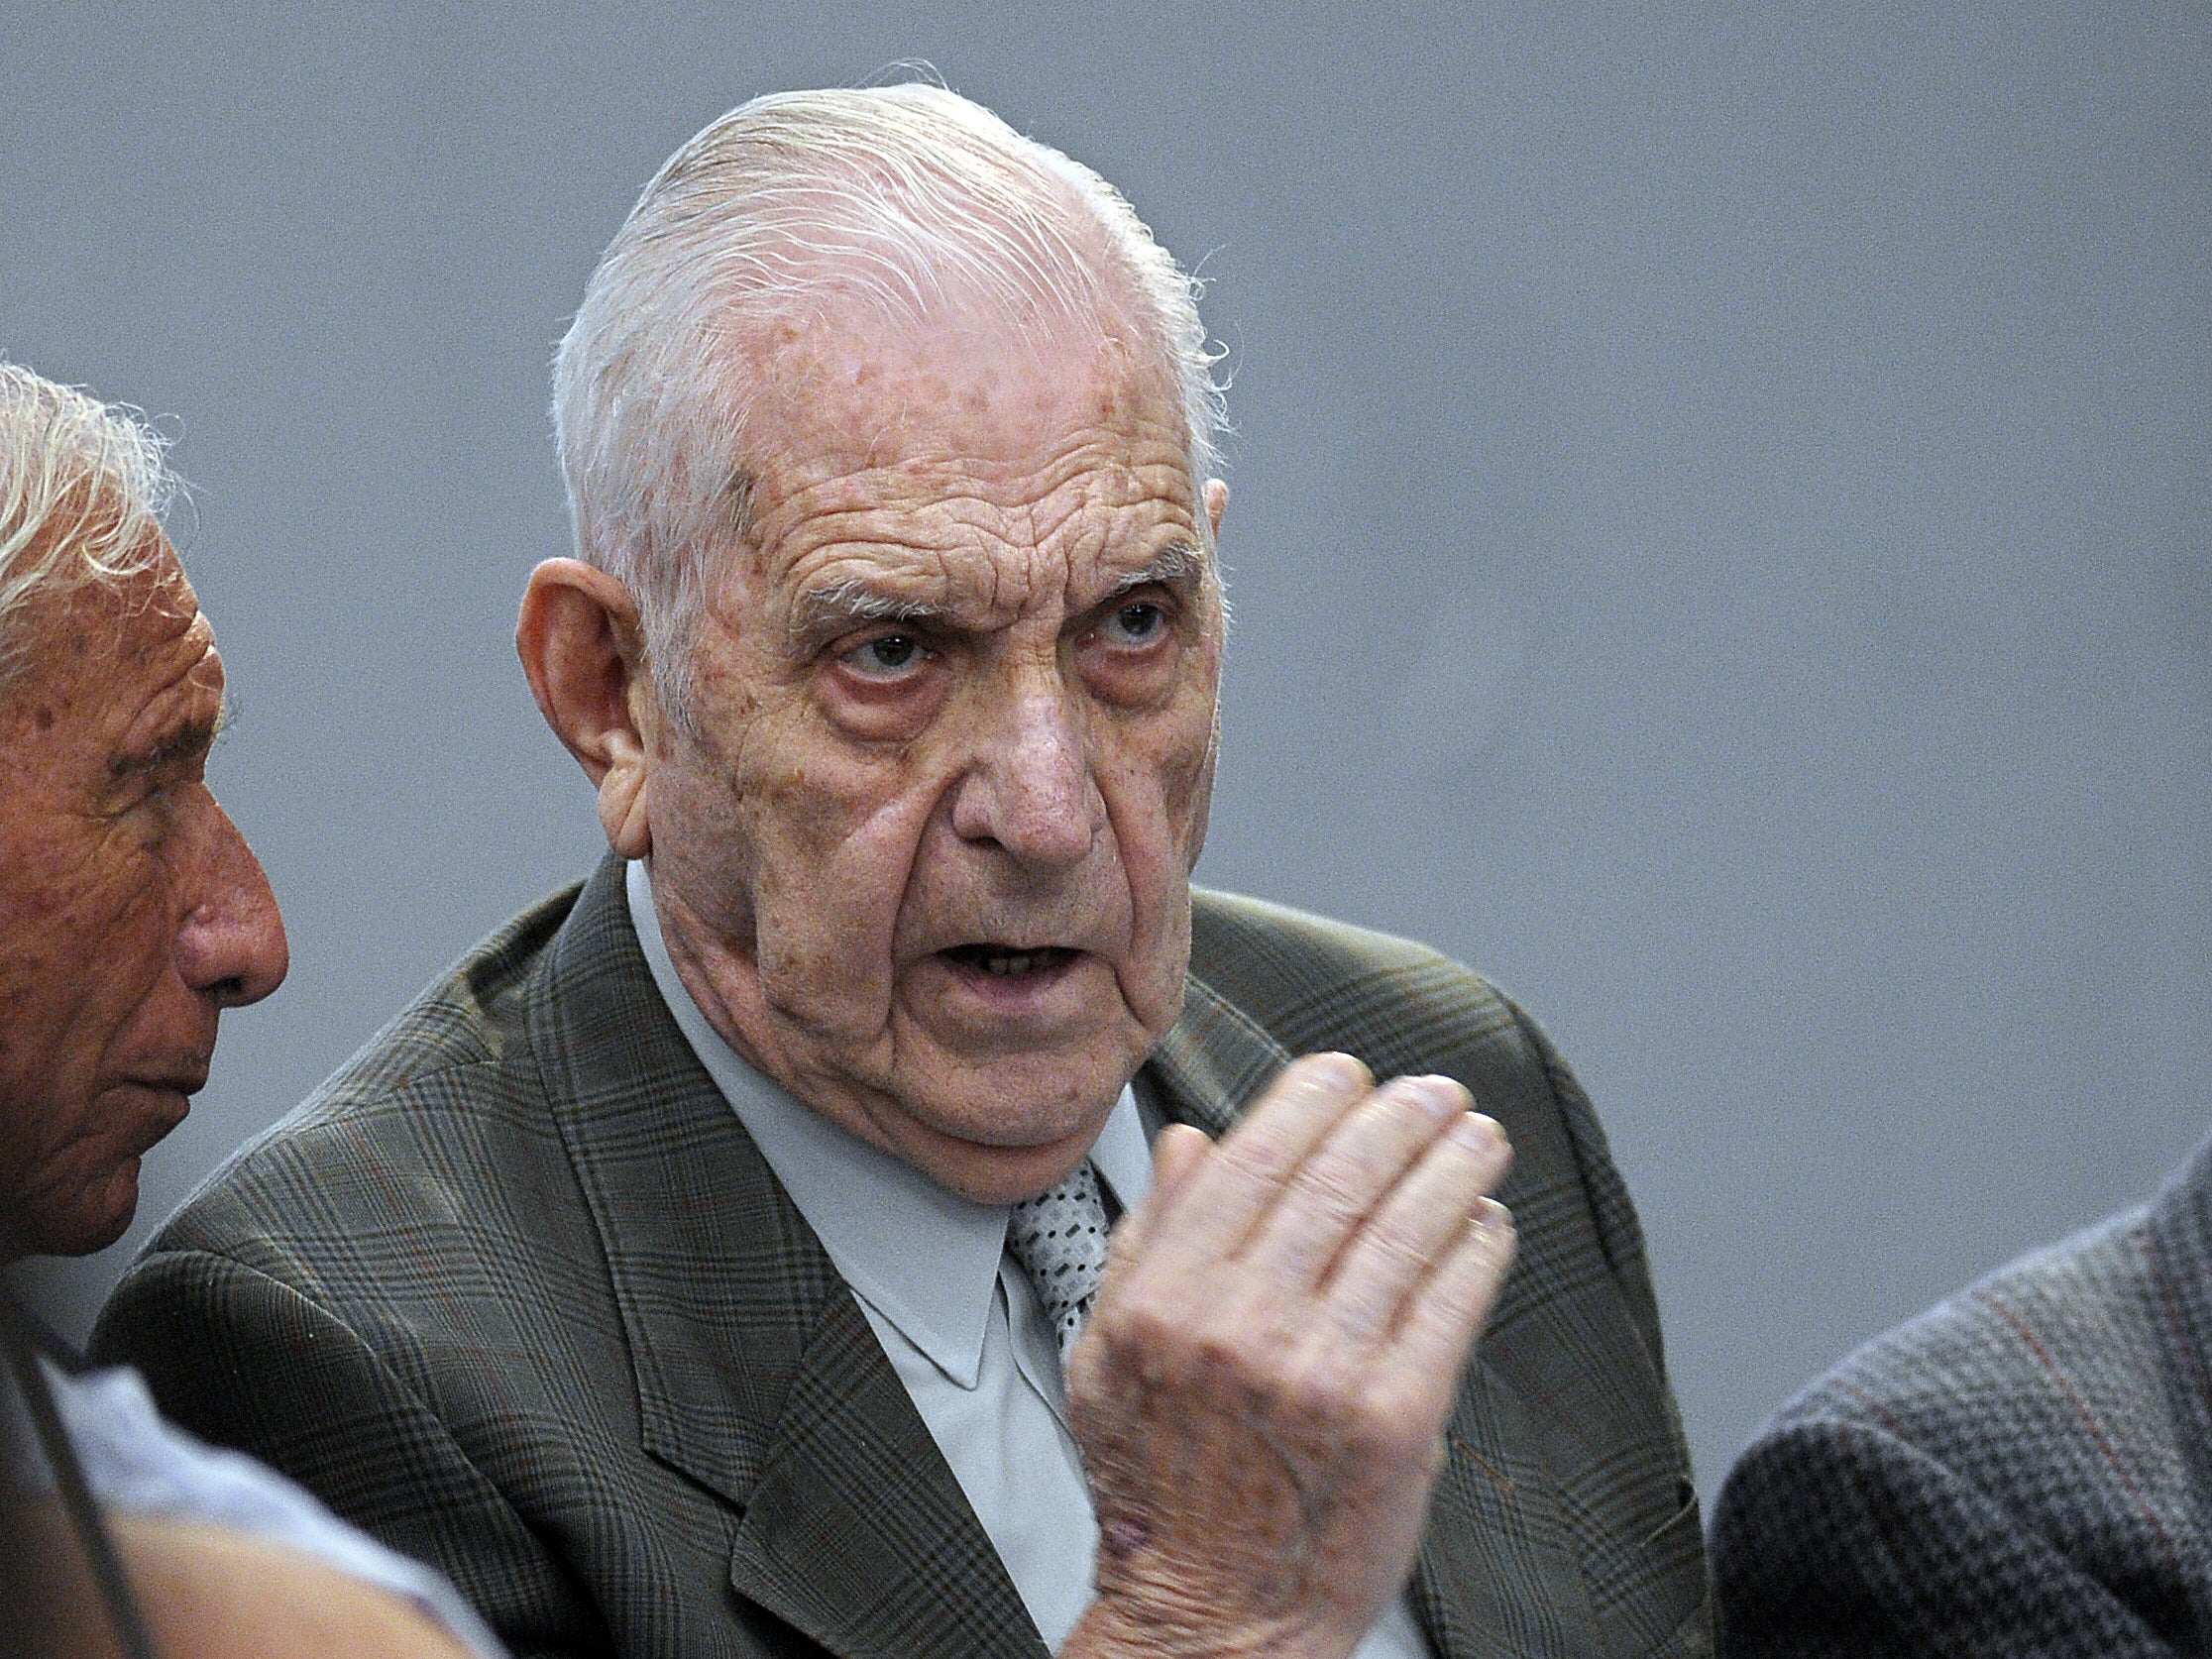 Reynaldo Bignone in court during his trial in Buenos Aires in 2010